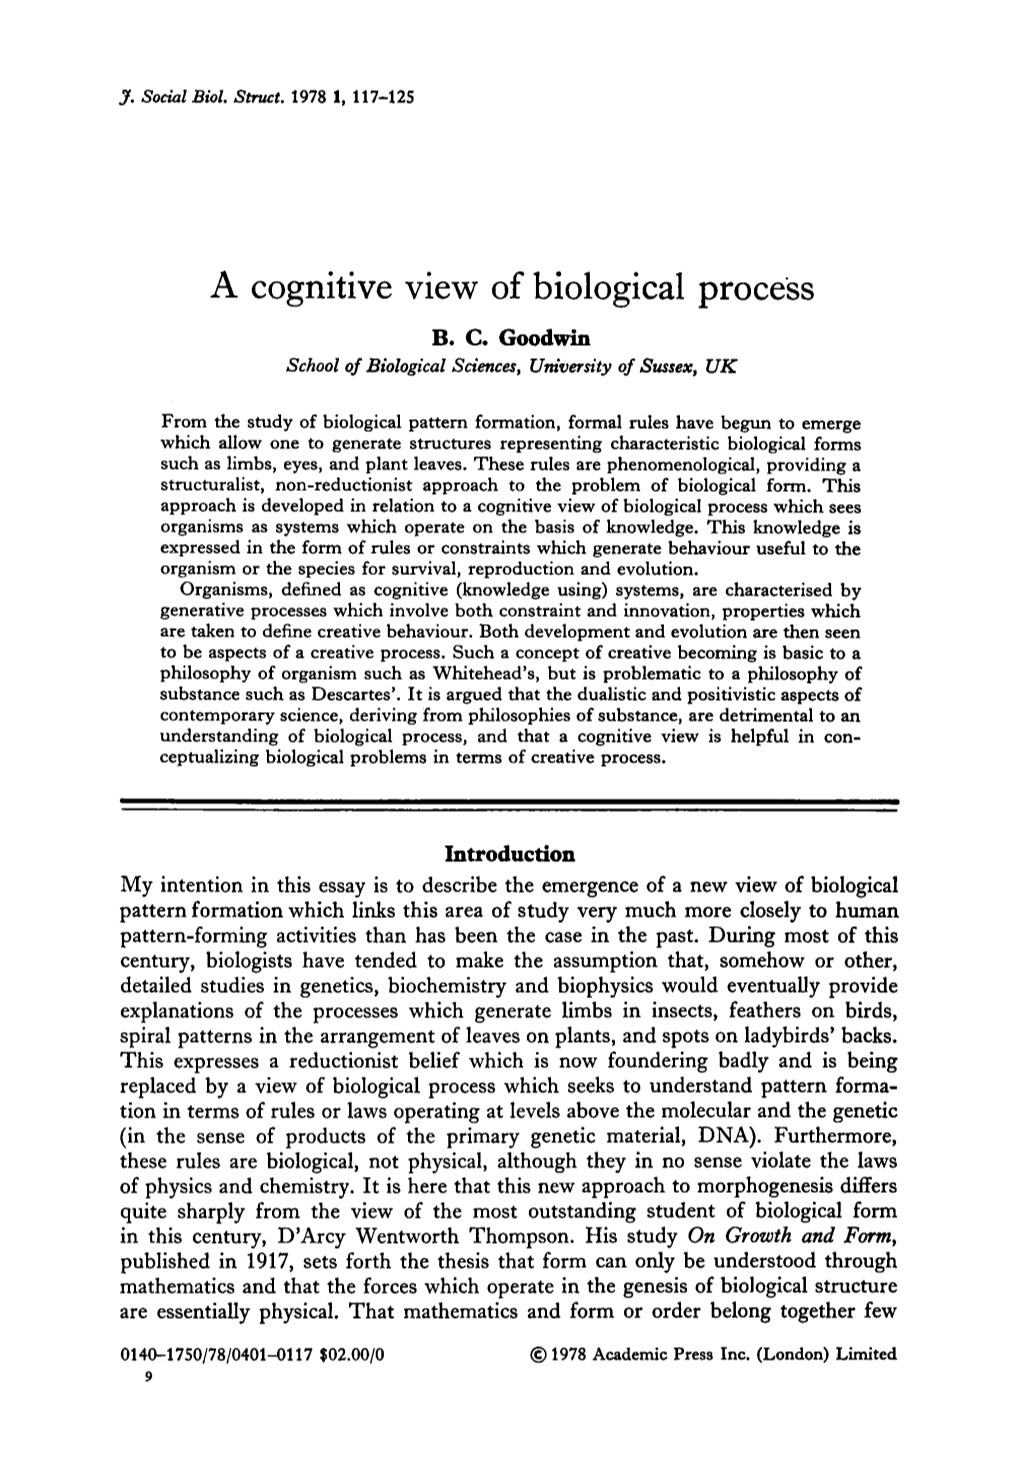 A Cognitive View of Biological Process